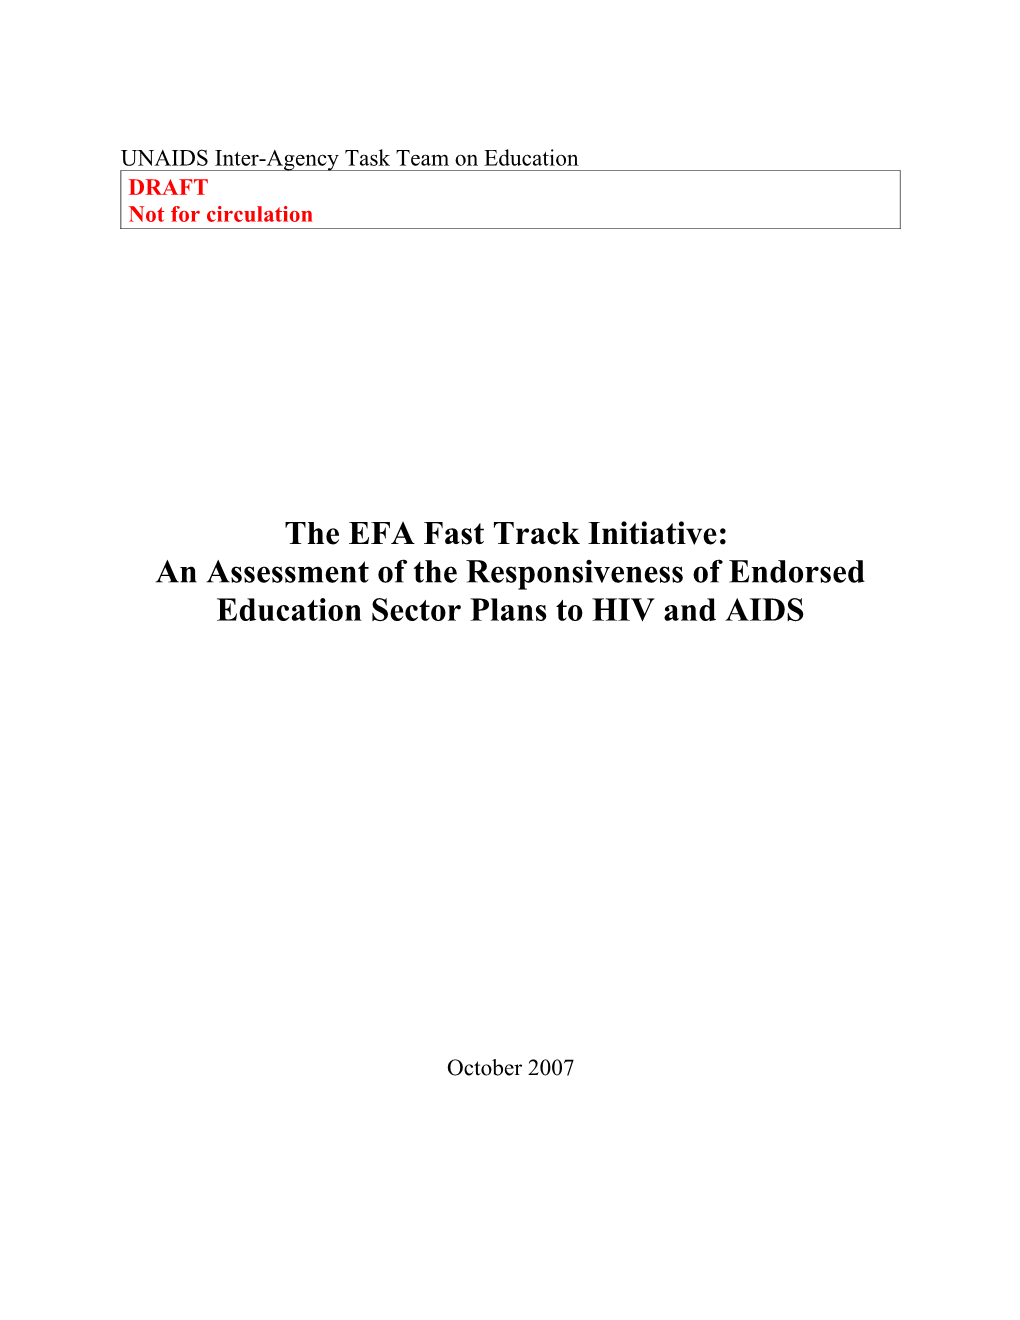 Hiv and Aids Assessment of Fti Endorsed National Education Plans